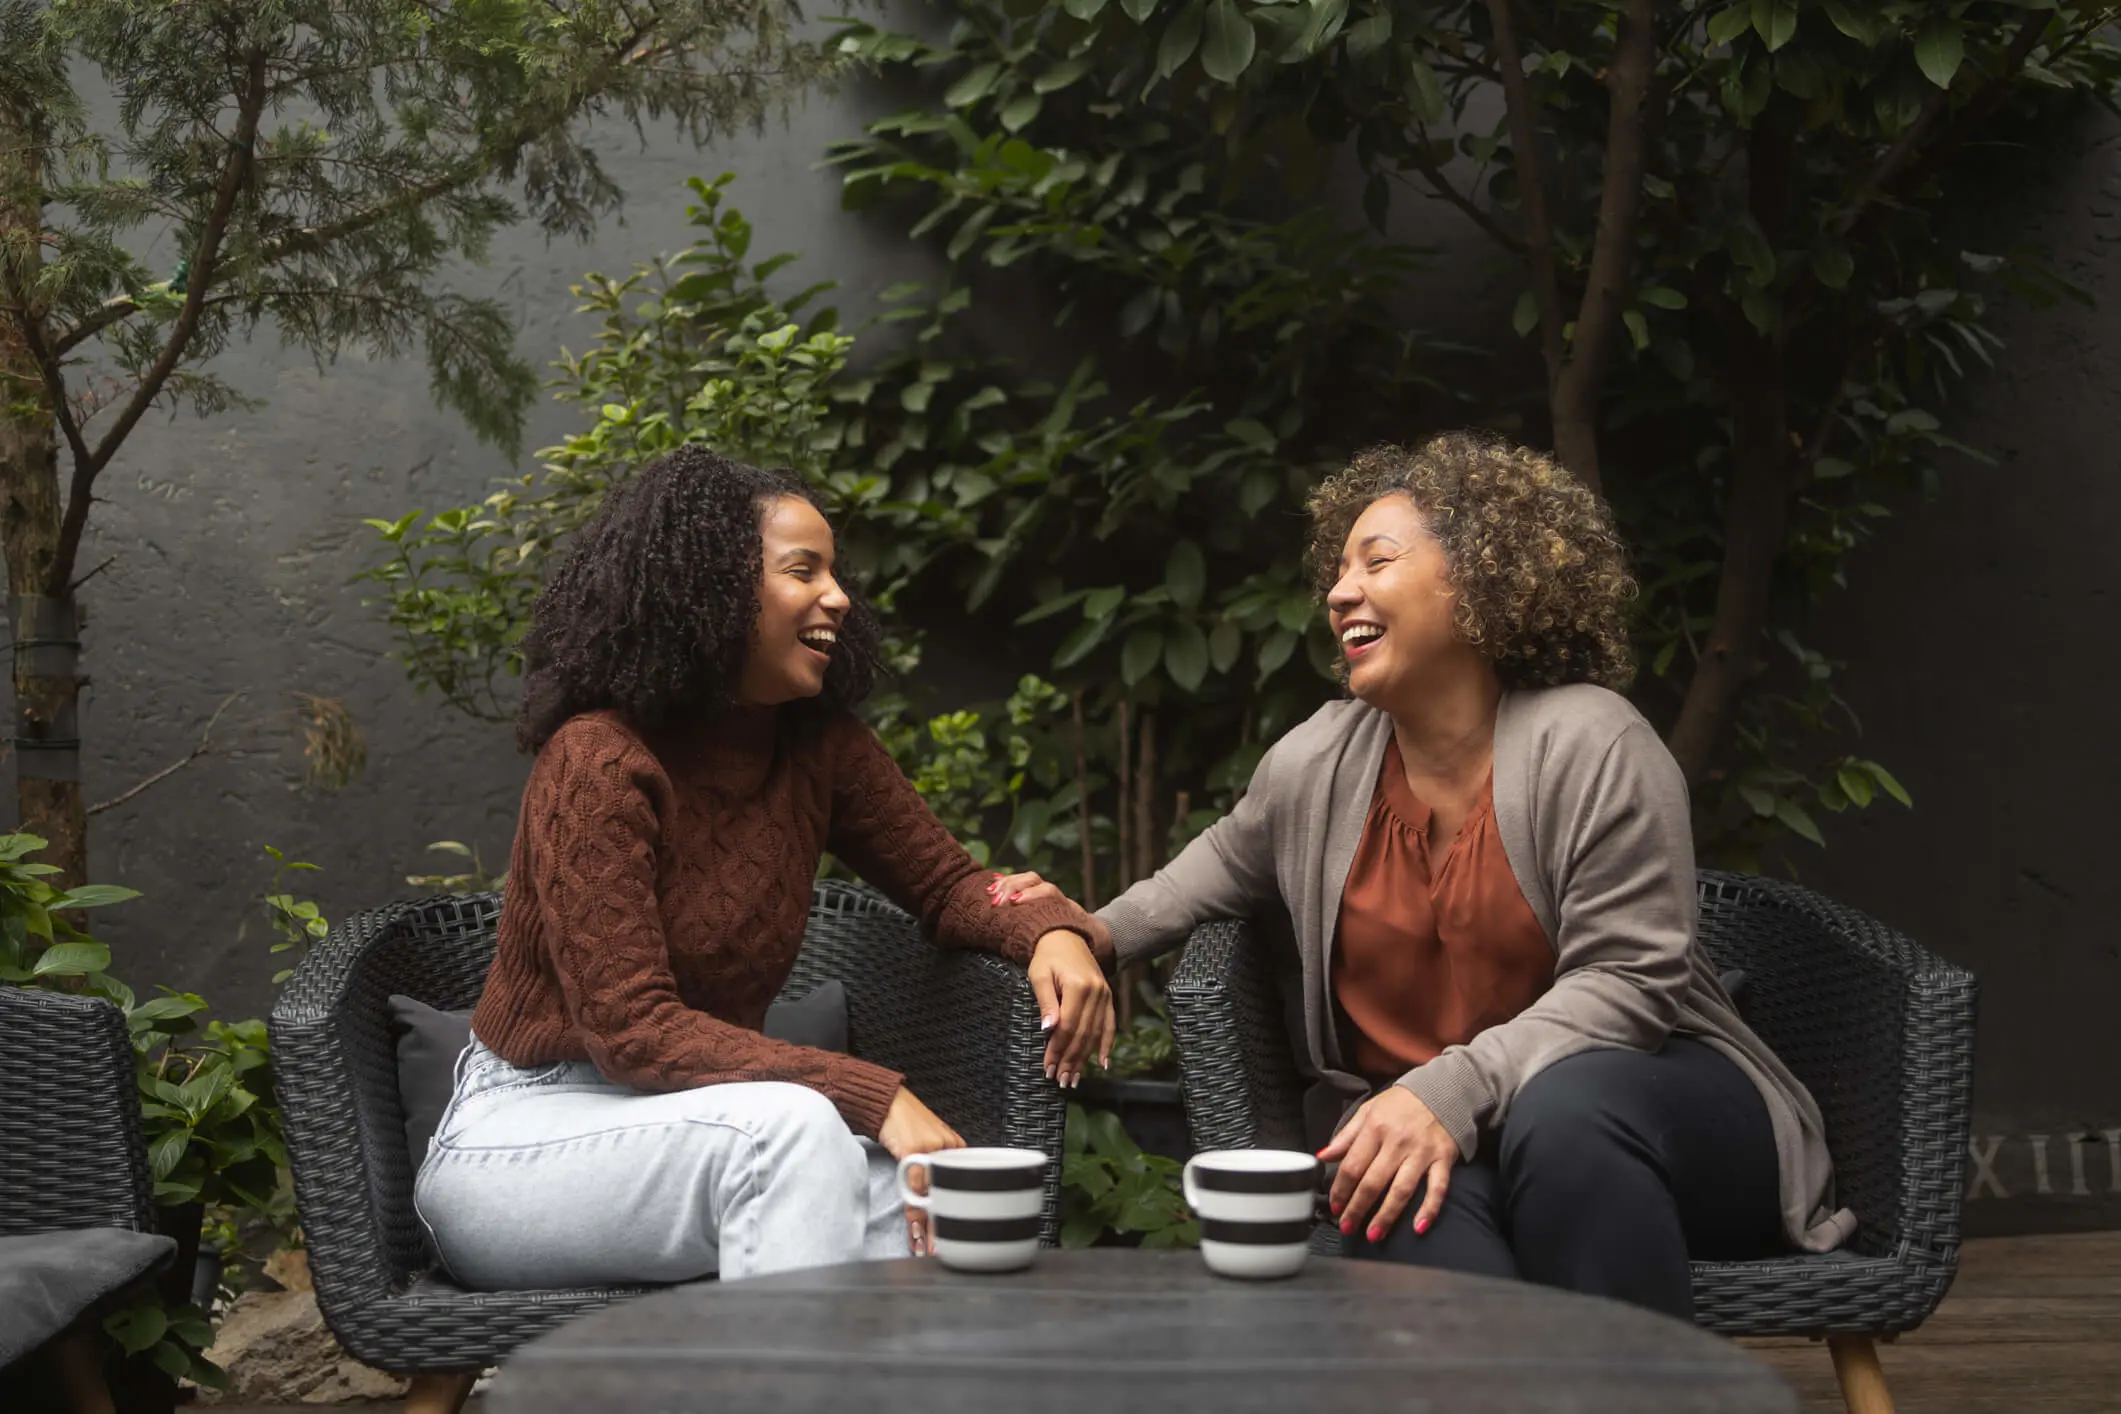 Two black women sitting on chairs in a garden.